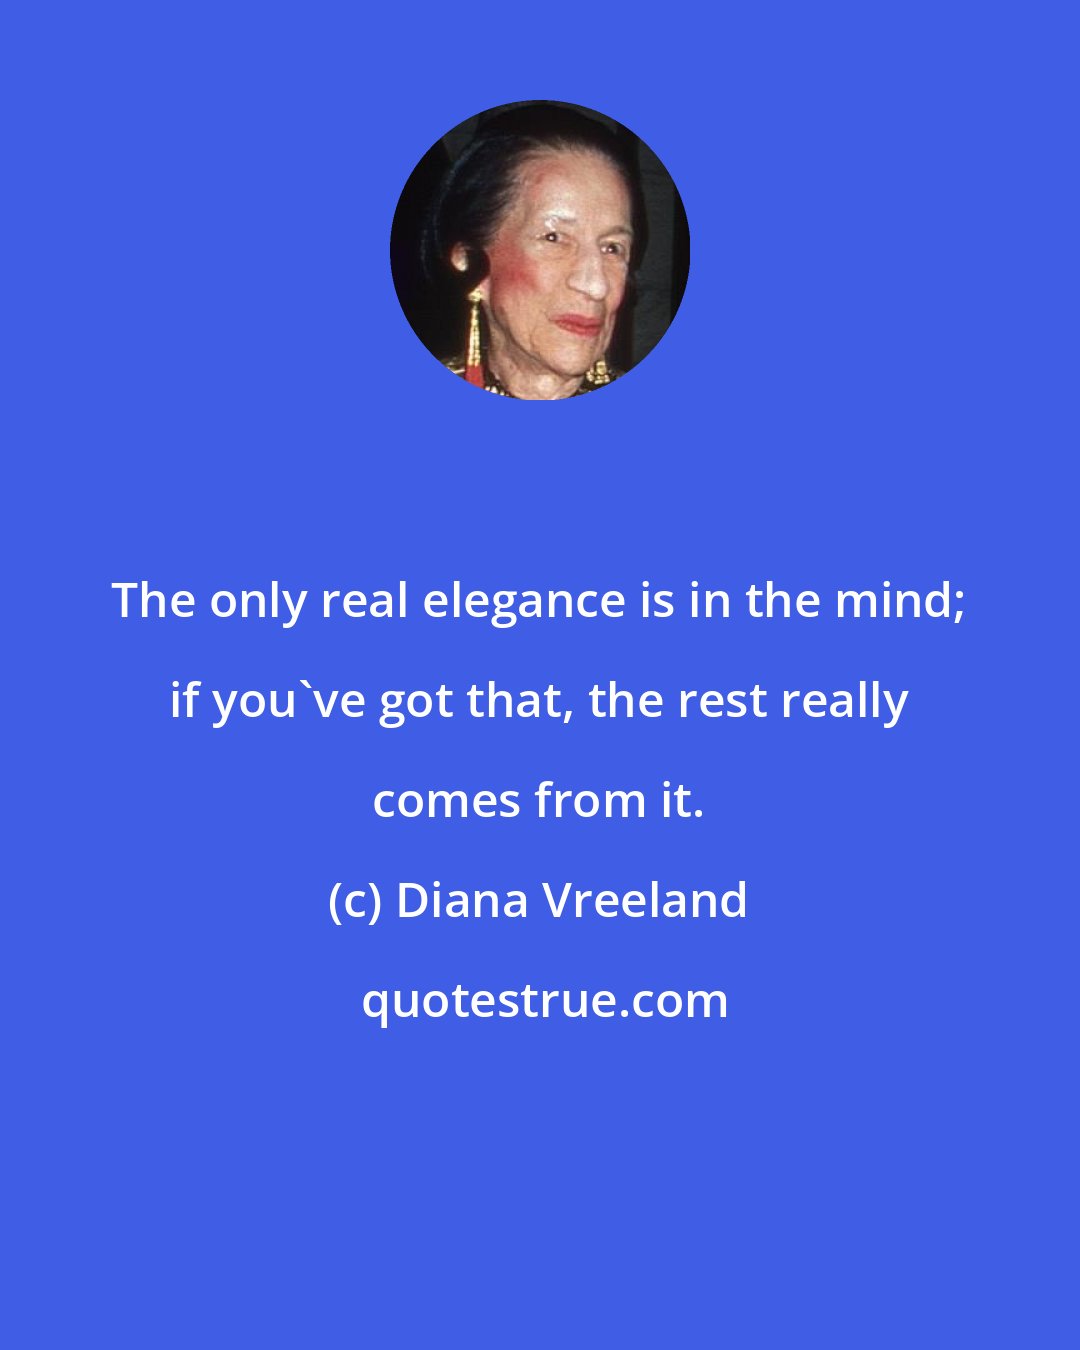 Diana Vreeland: The only real elegance is in the mind; if you've got that, the rest really comes from it.